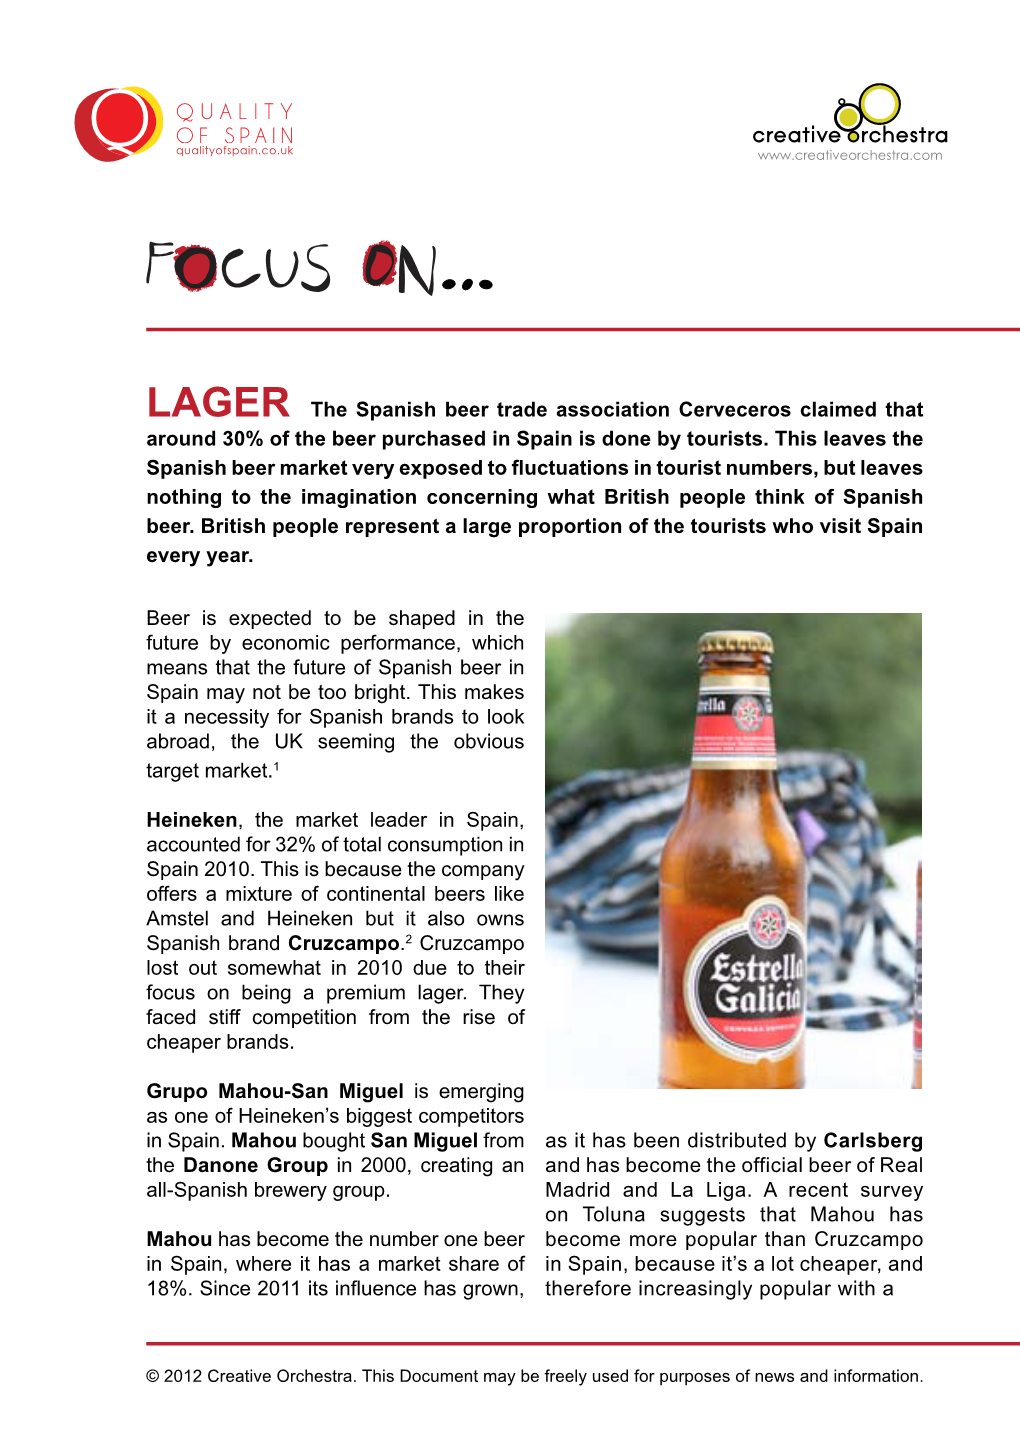 LAGER the Spanish Beer Trade Association Cerveceros Claimed That Around 30% of the Beer Purchased in Spain Is Done by Tourists